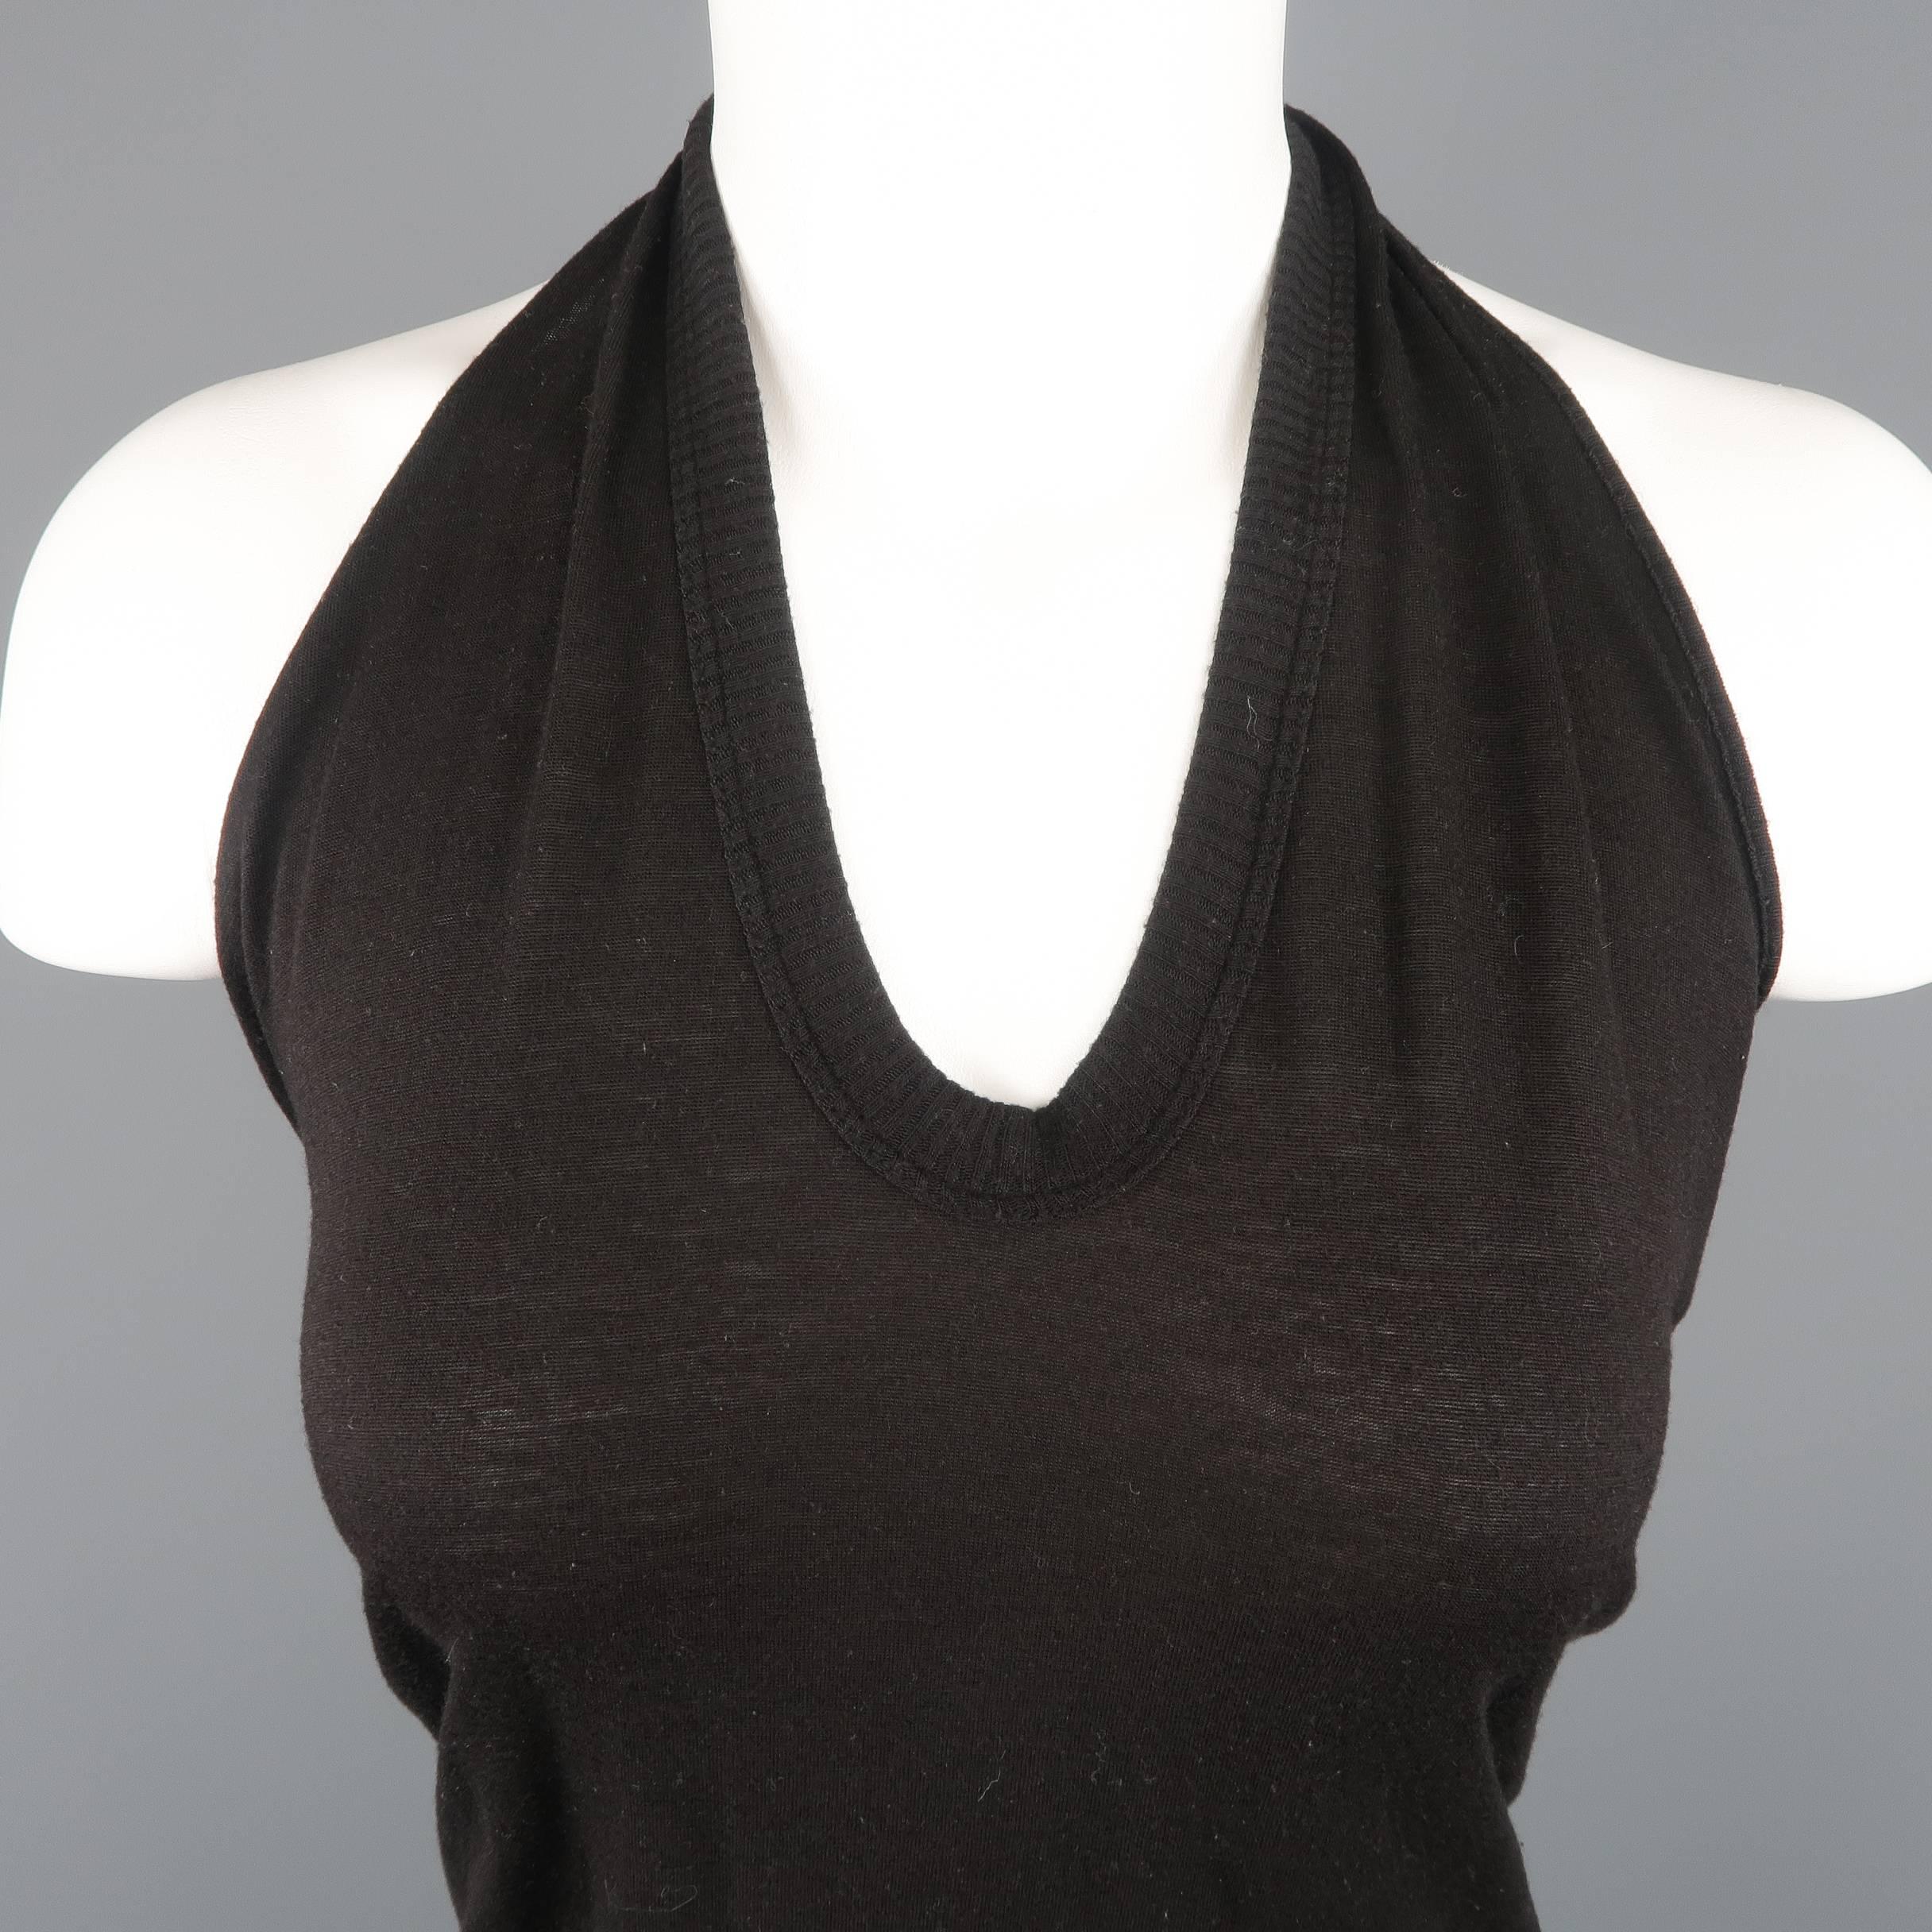 RICK OWENS top comes in black silk viscose blend jersey with a ribbed halter top. Made in Italy.
 
Good Pre-Owned Condition.
Marked: US 6
 
Measurements:
 
Bust: 38 in.
Length: 30 in.
